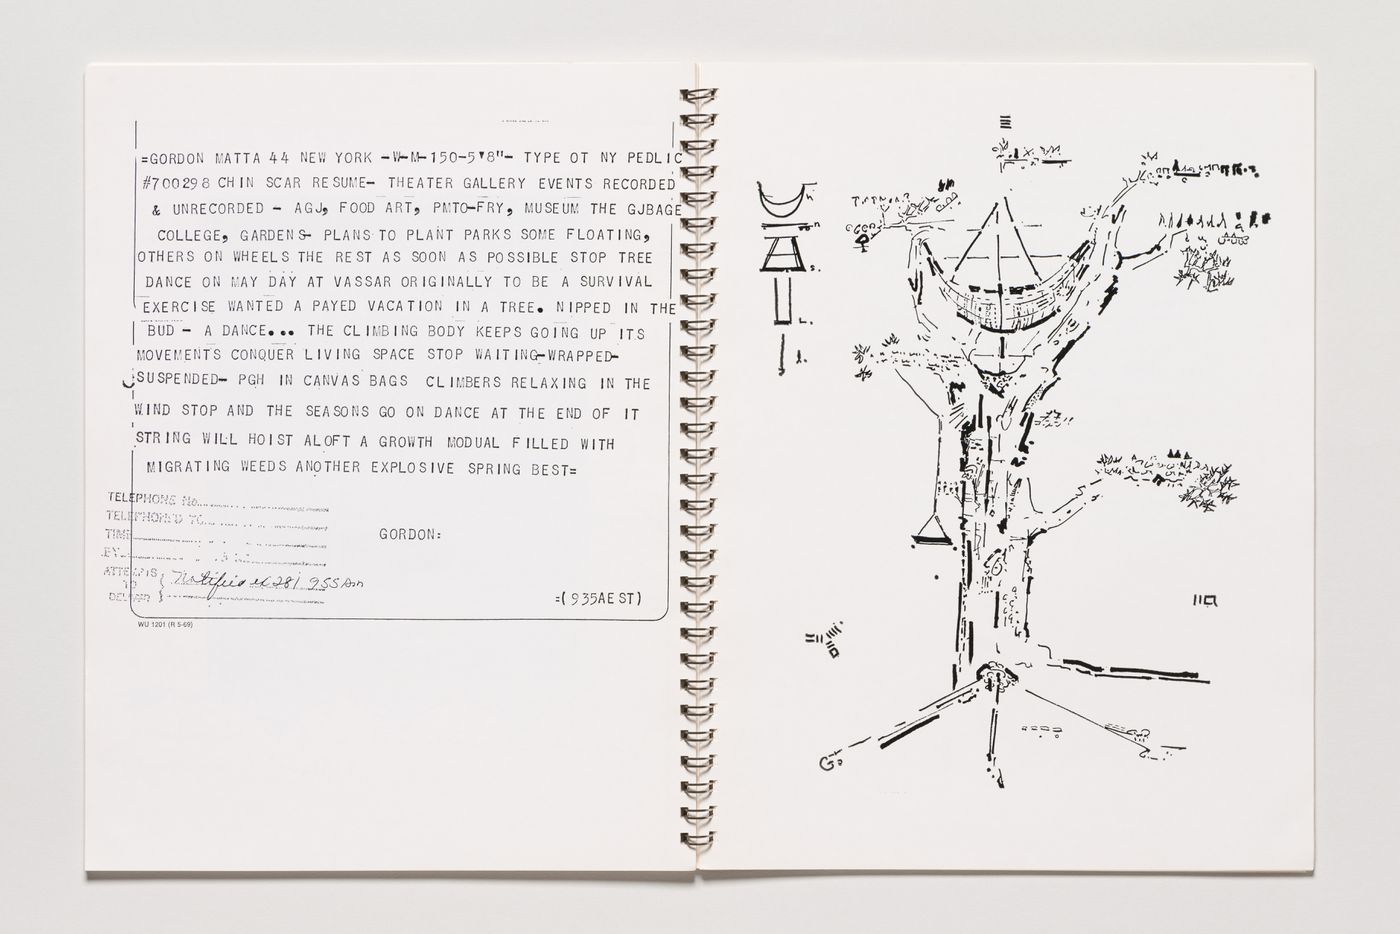 "Tree Dance" drawing by Gordon Matta-Clark published in the catalogue for the exhibition "Twenty Six by Twenty Six", held at the Vassar College Art Gallery, between 1 may - 6 June 1971